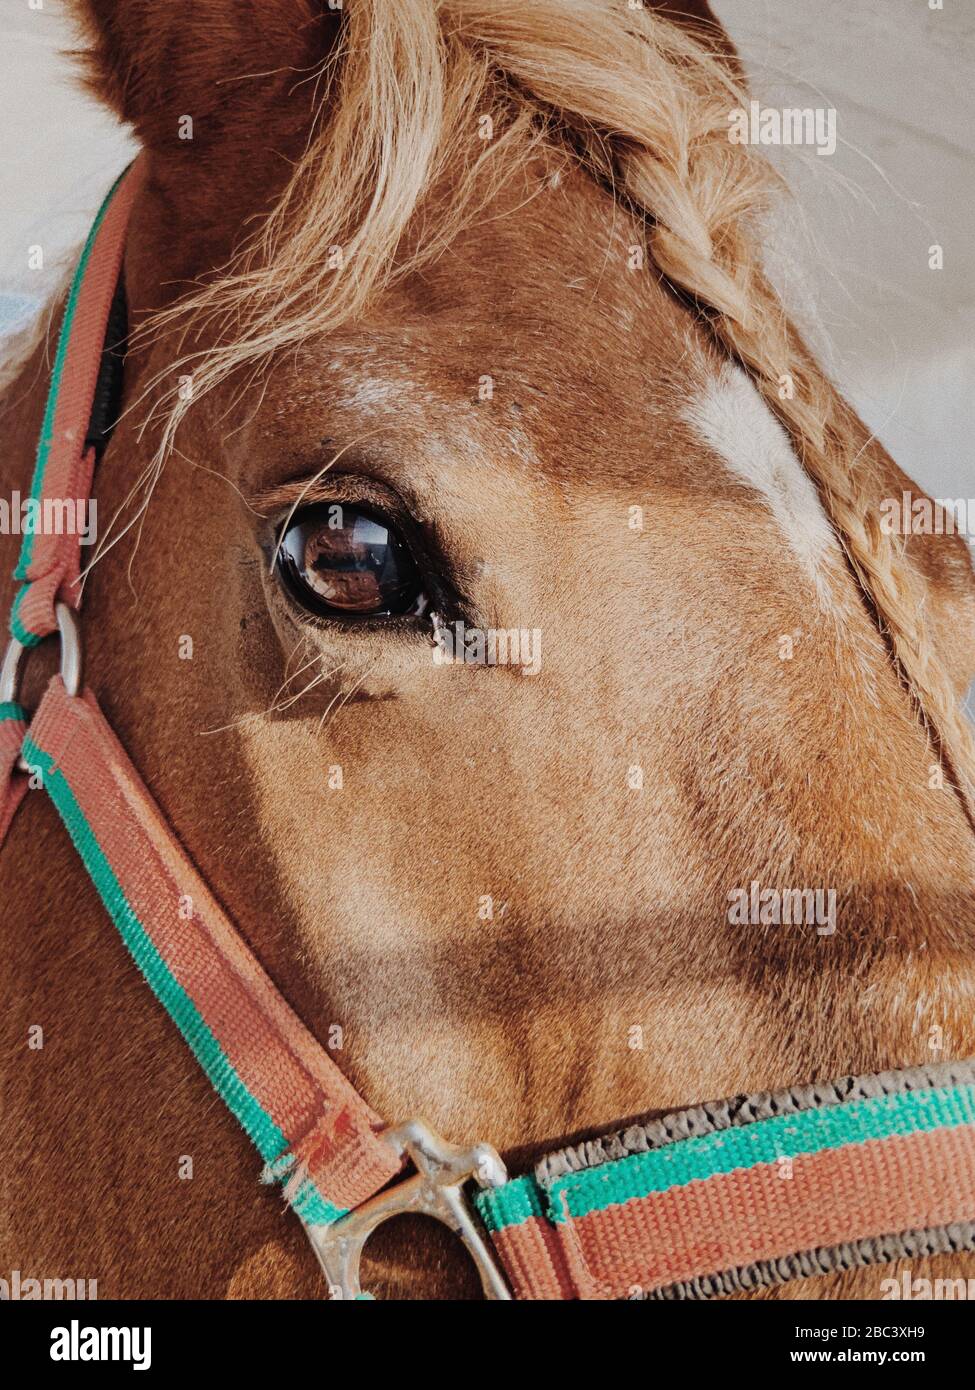 Close up of a brown horse head Stock Photo